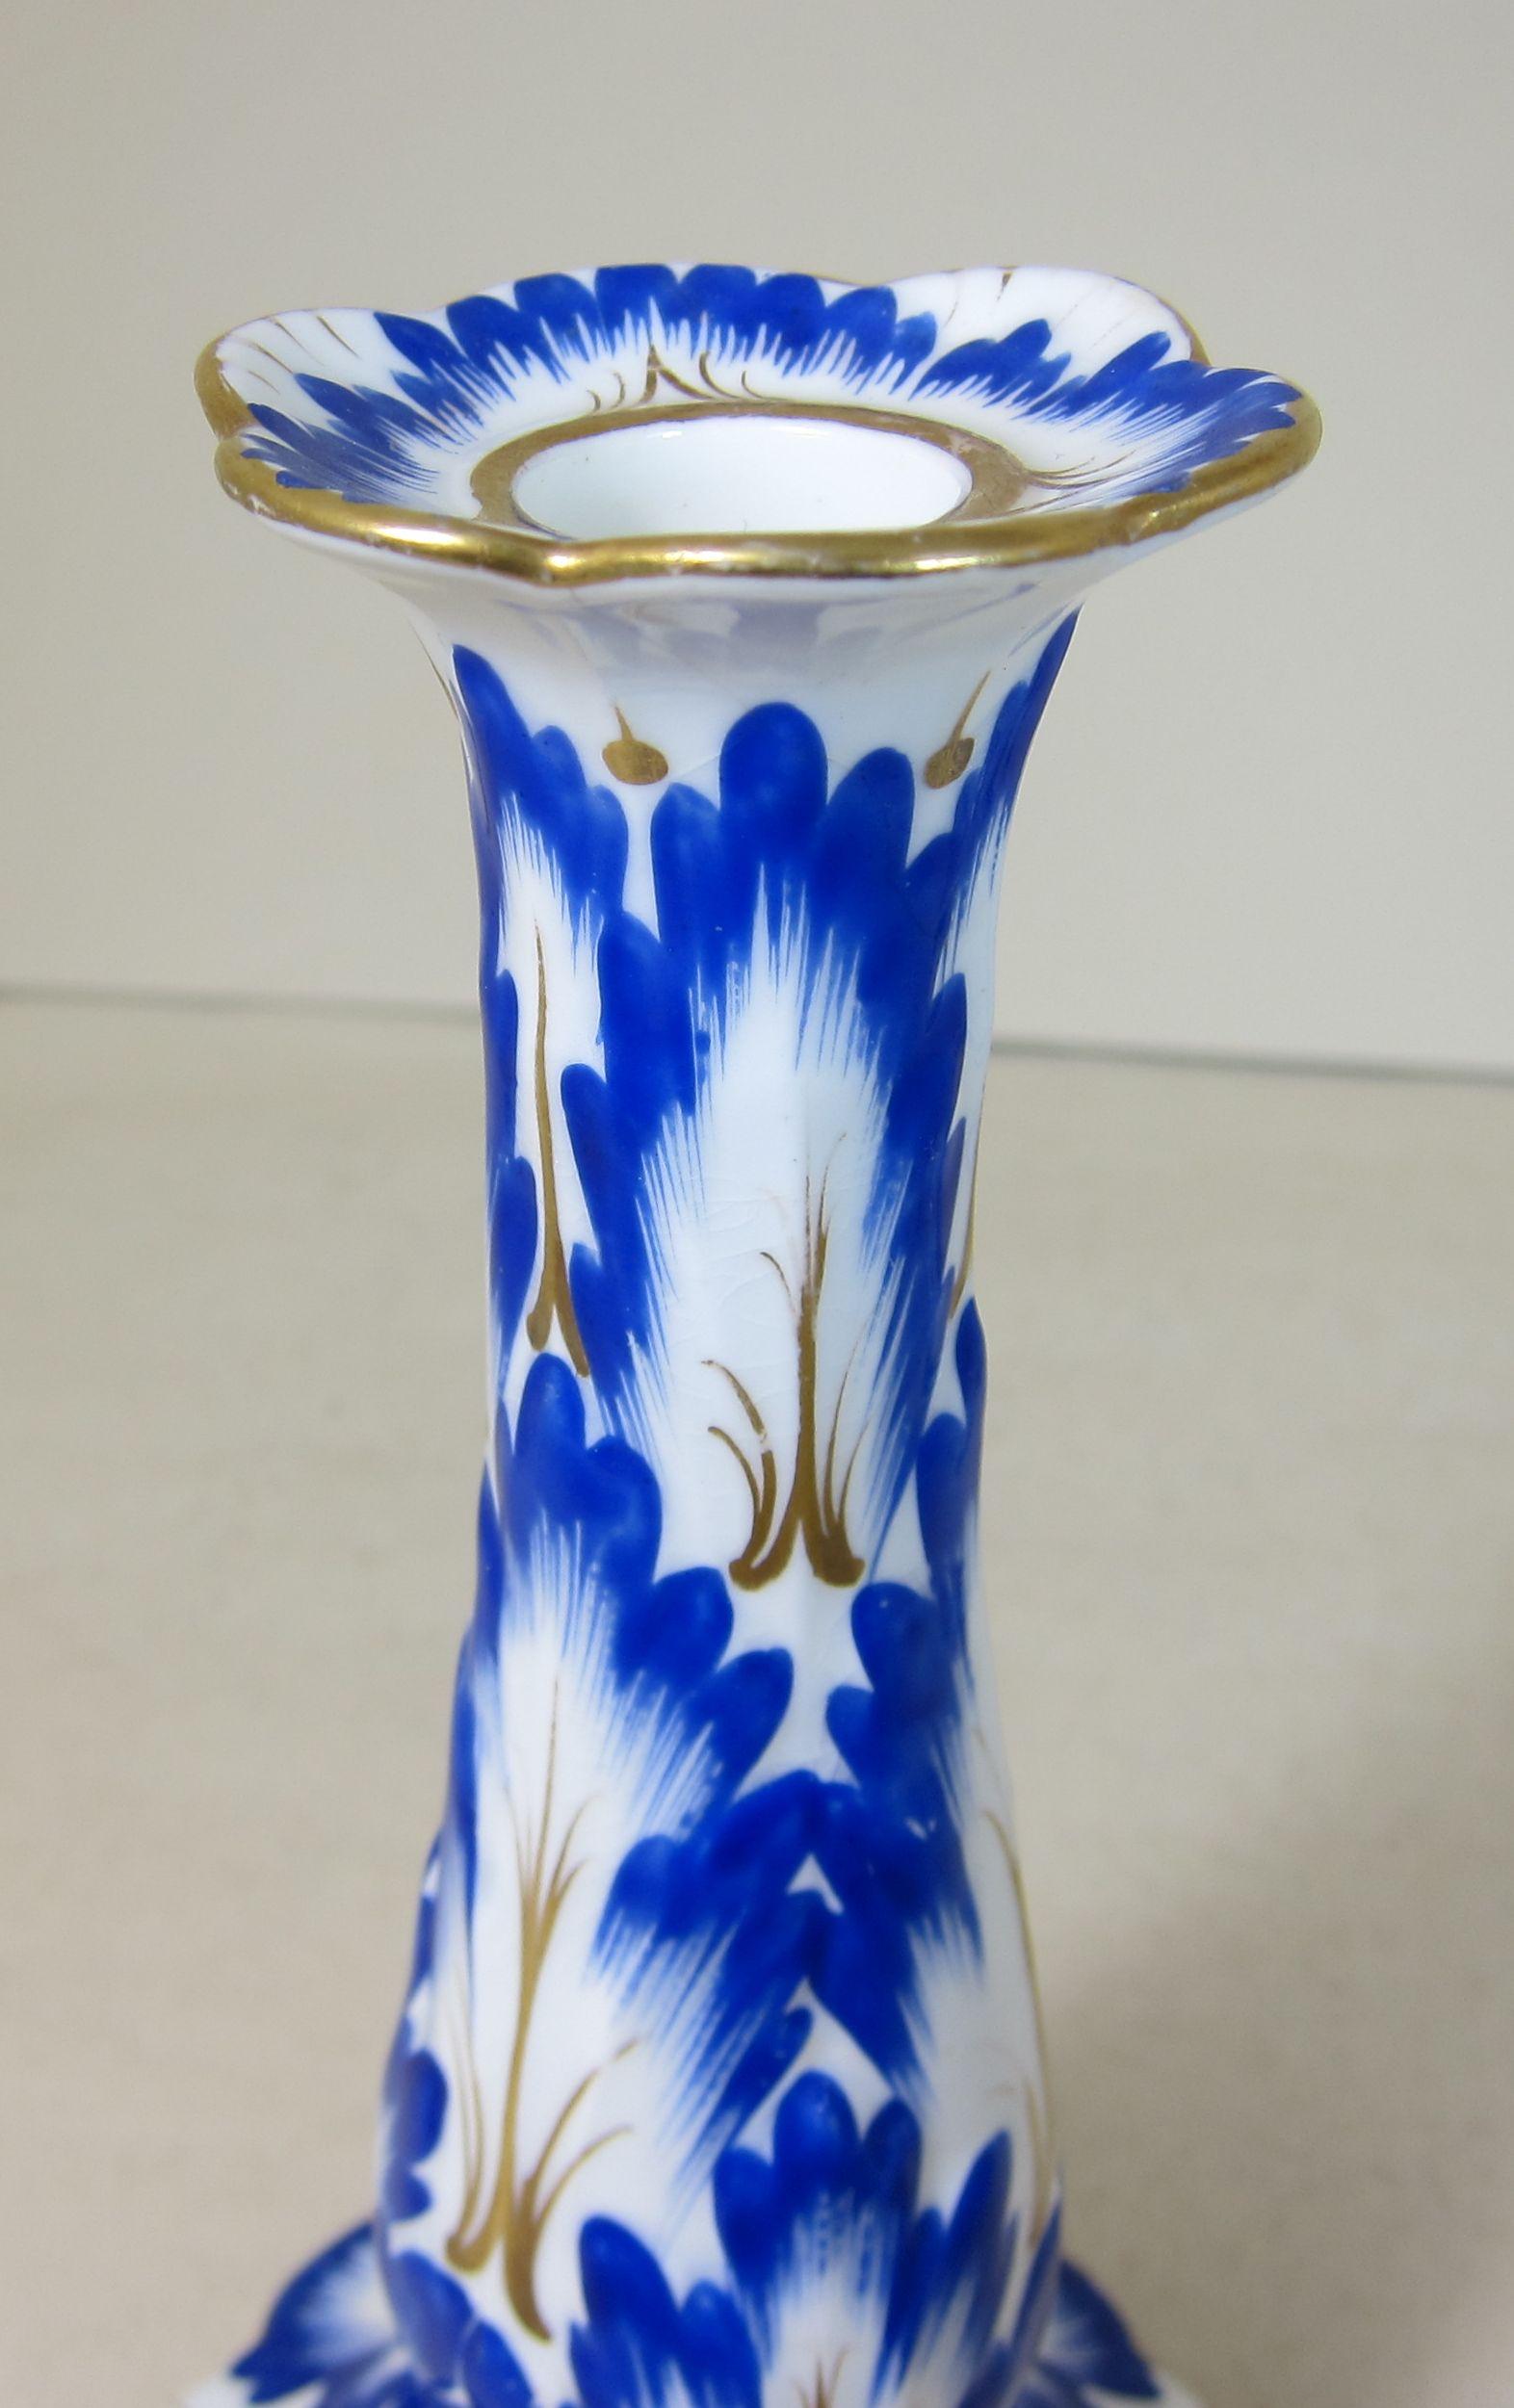 Early 19th Century Pair of English Porcelain Candlesticks Decorated with Blue and Gilt Leaves